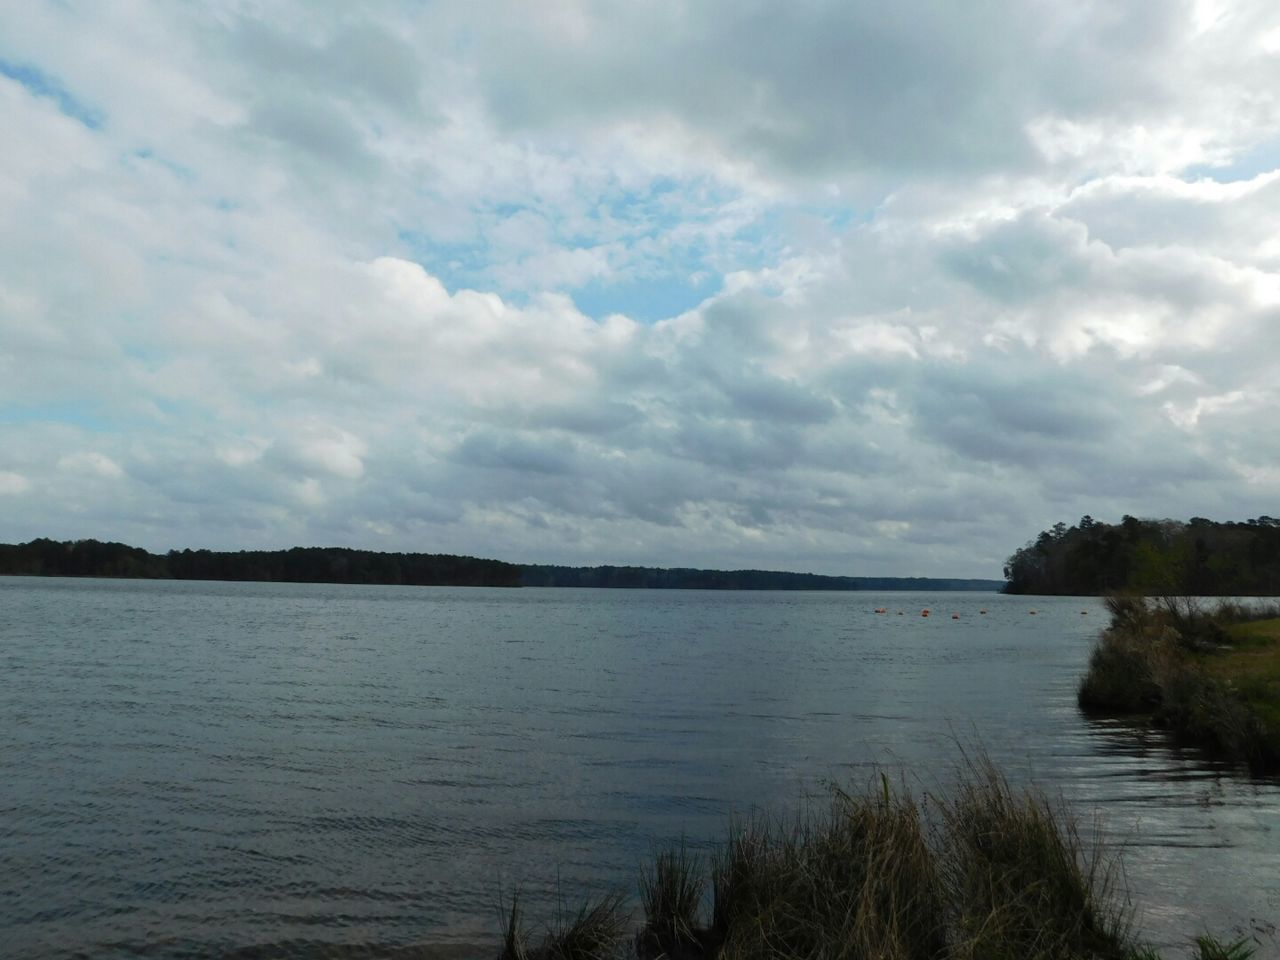 VIEW OF LAKE AGAINST SKY